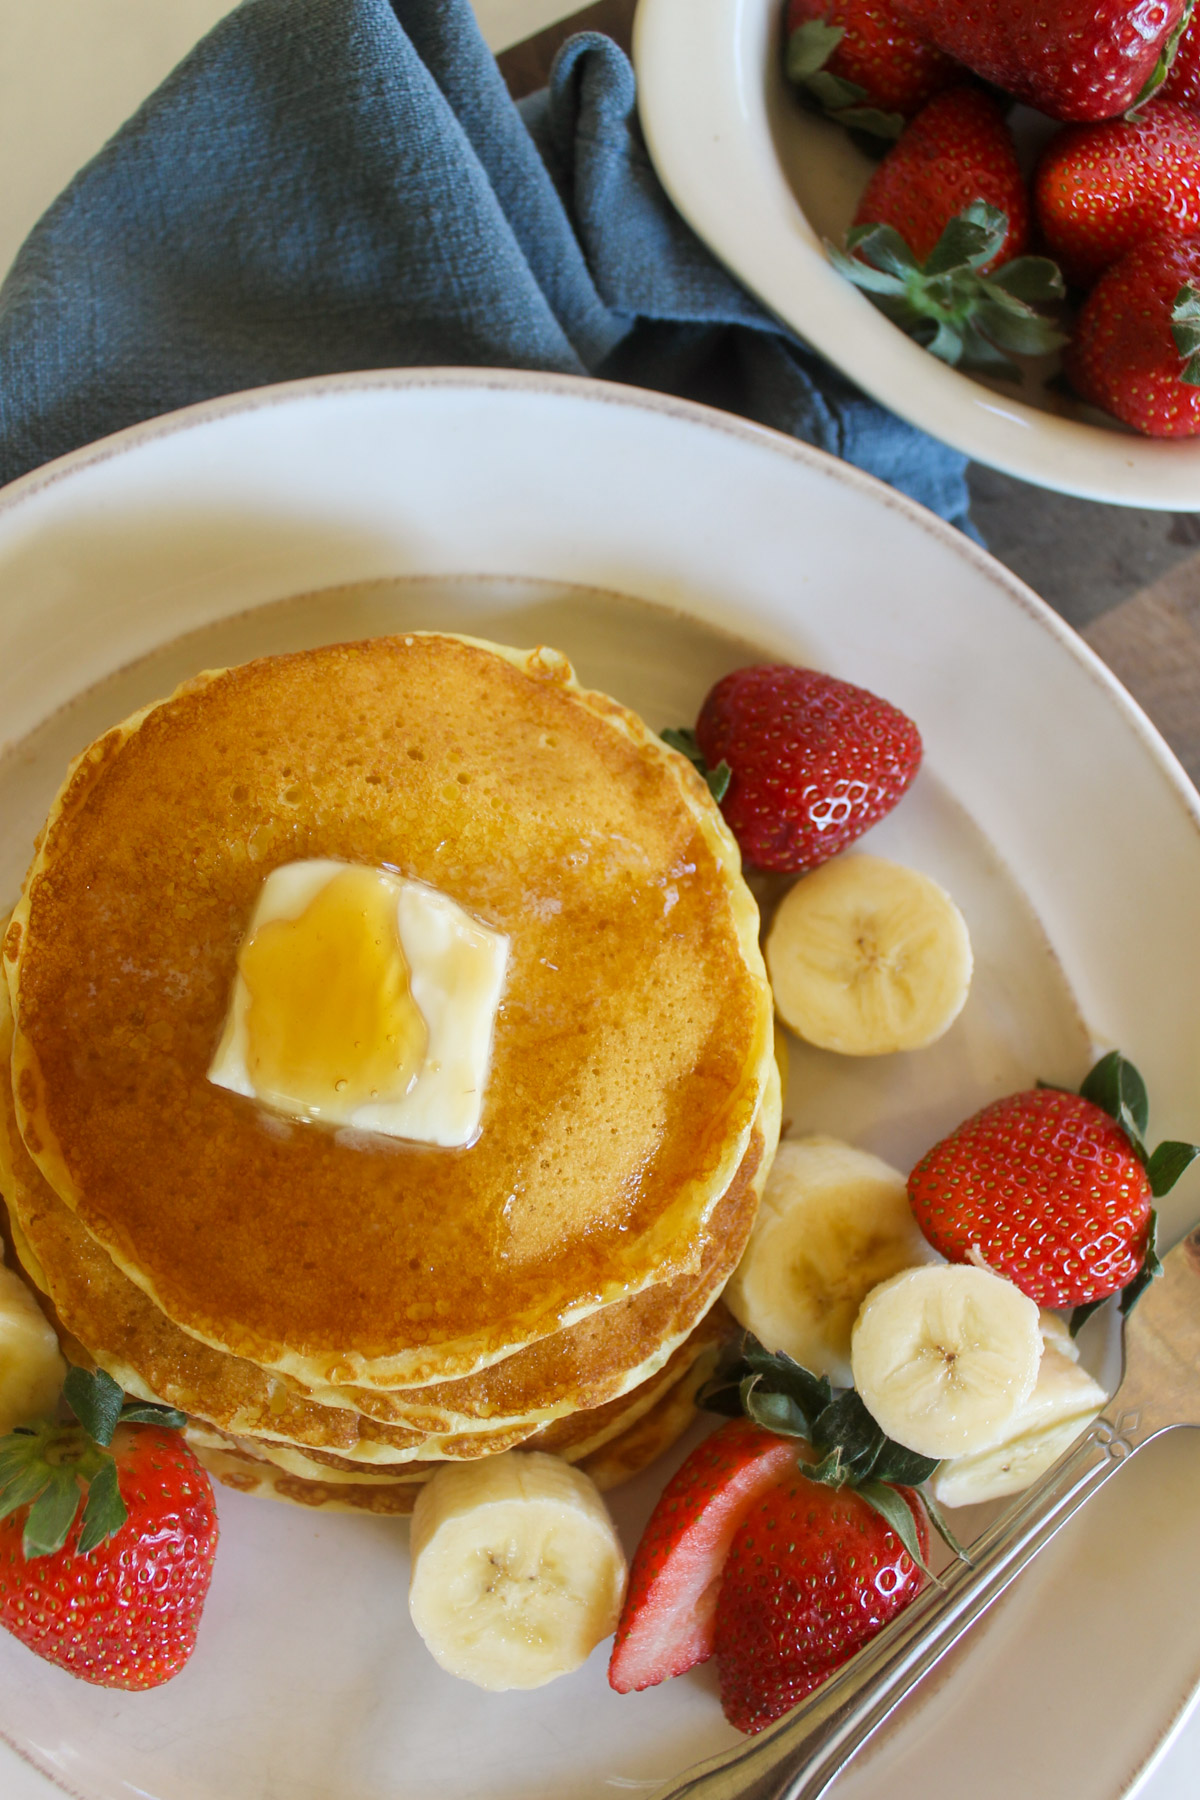 Buttermilk pancakes on a plate surrounded by fruit.